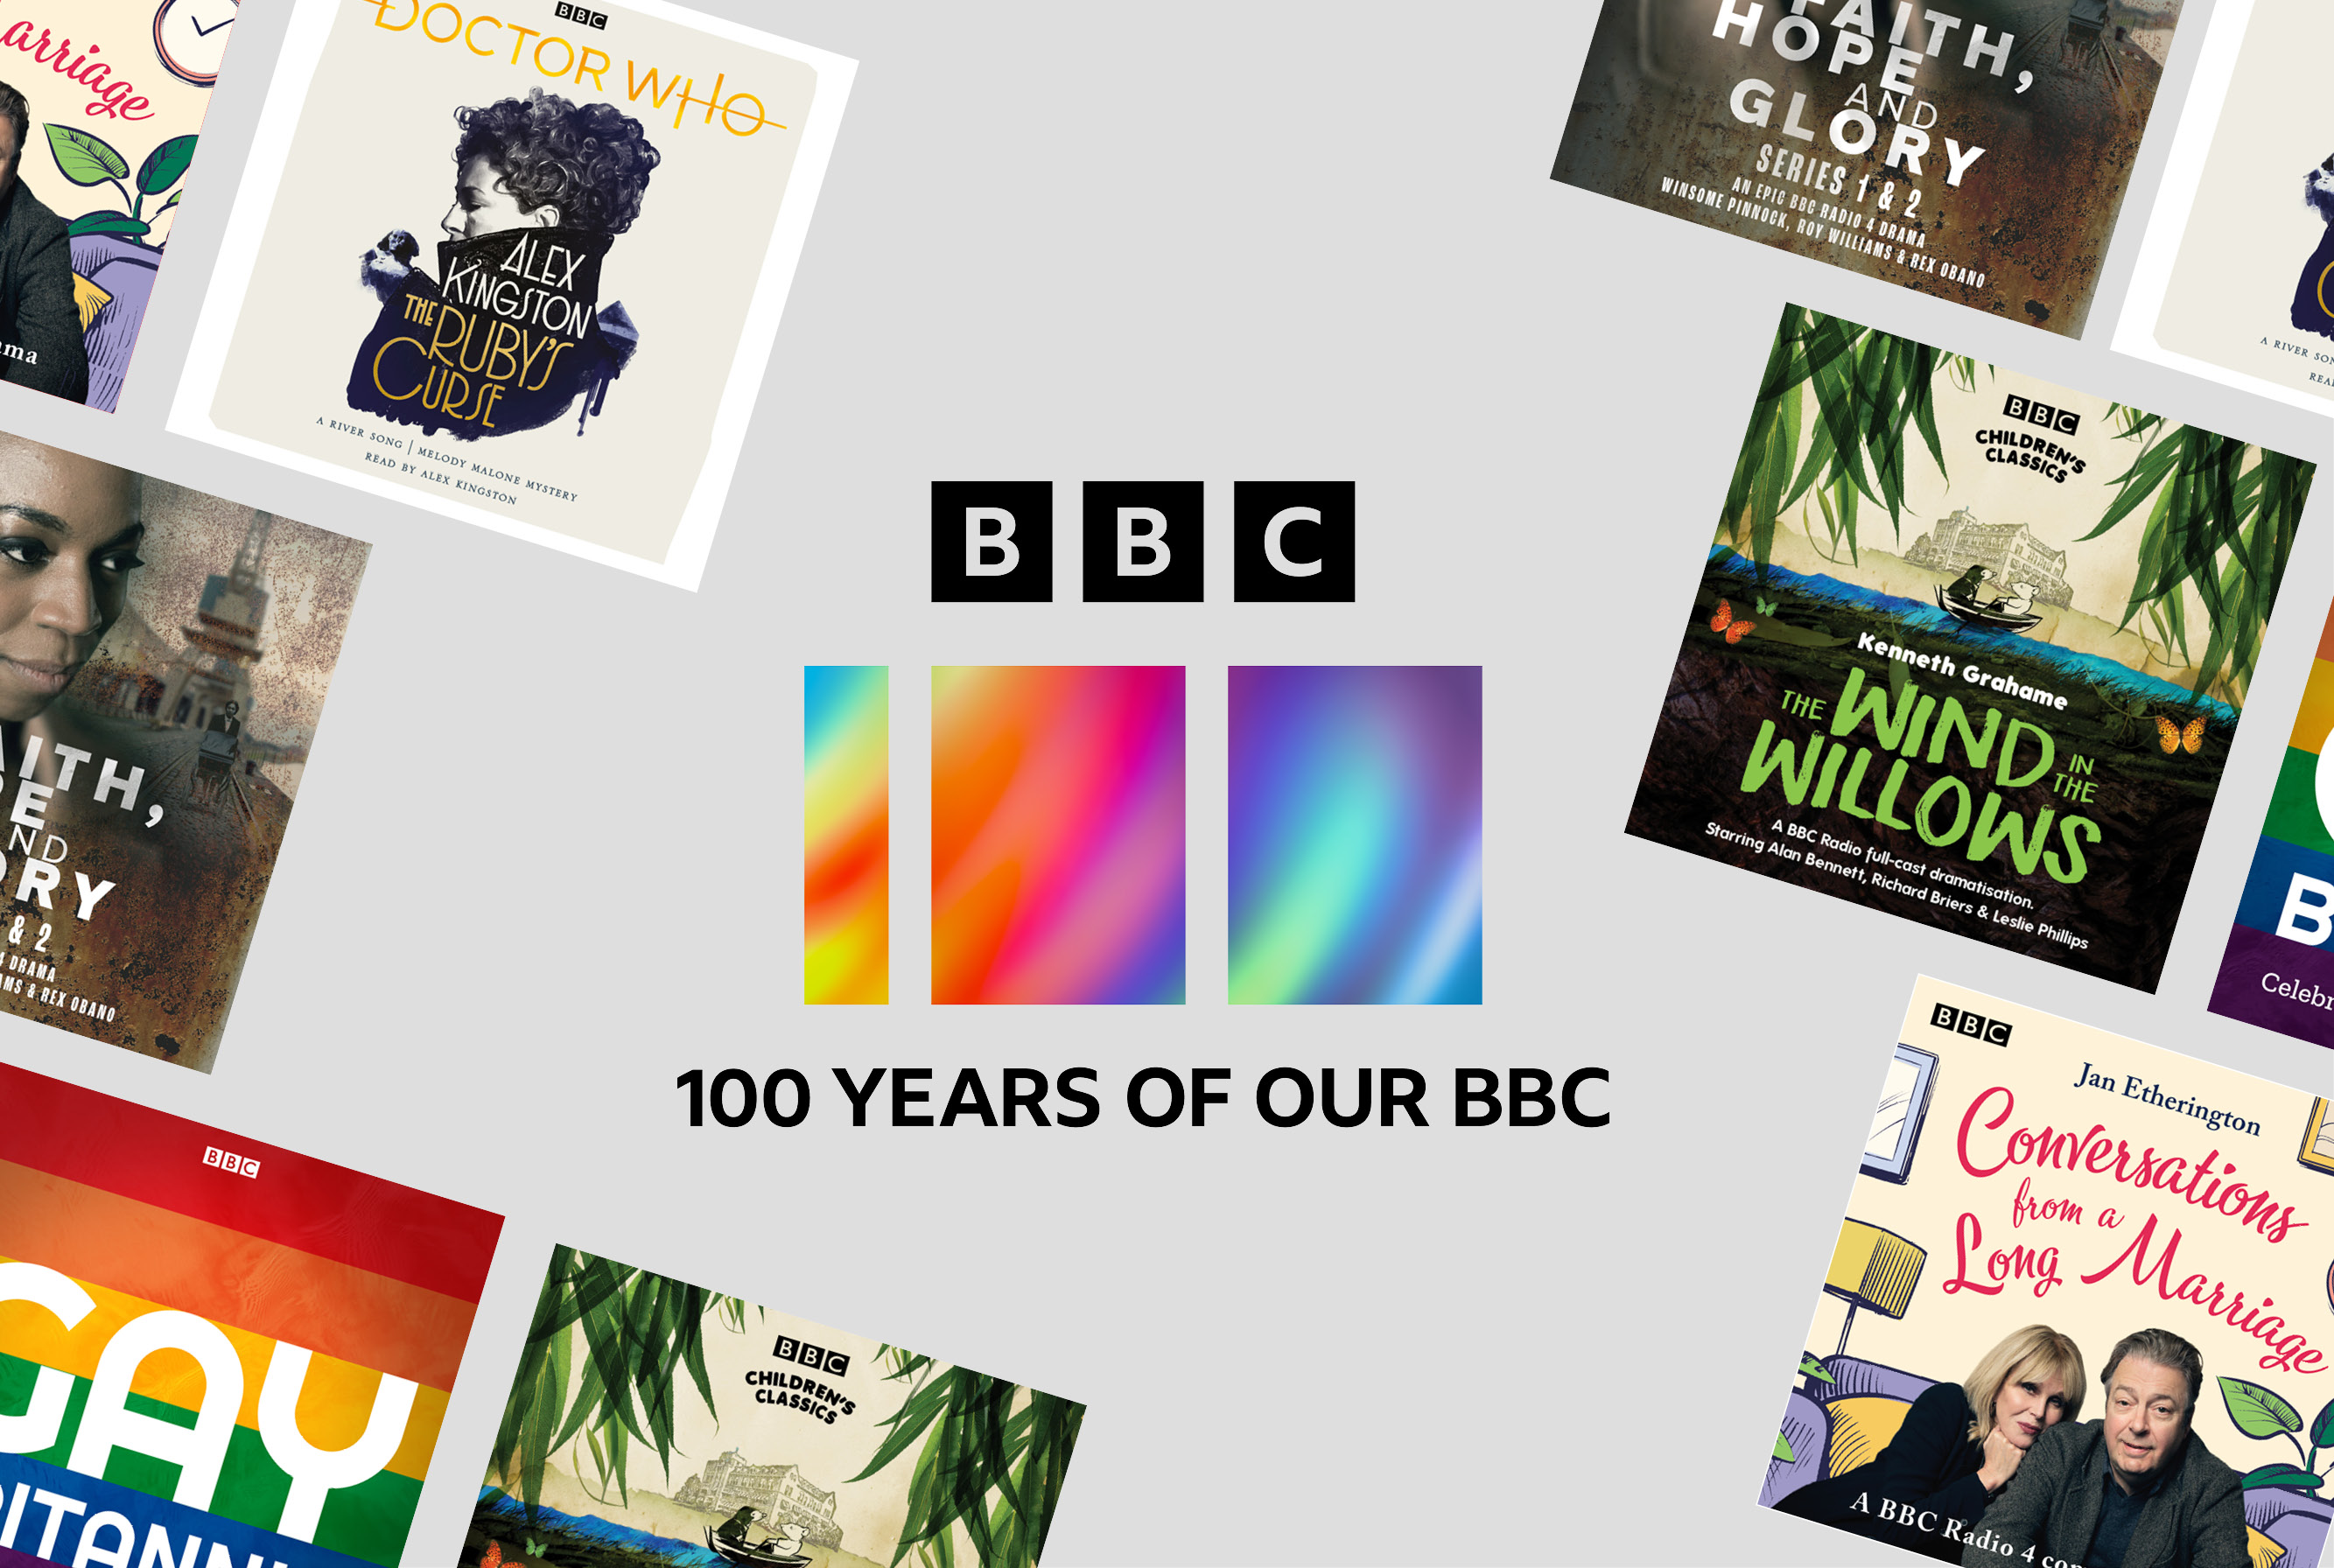 A banner featuring the BBC logo in the centre, with "100" underneath it in rainbow colours, and "100 Years of Our BBC" in black text below that.